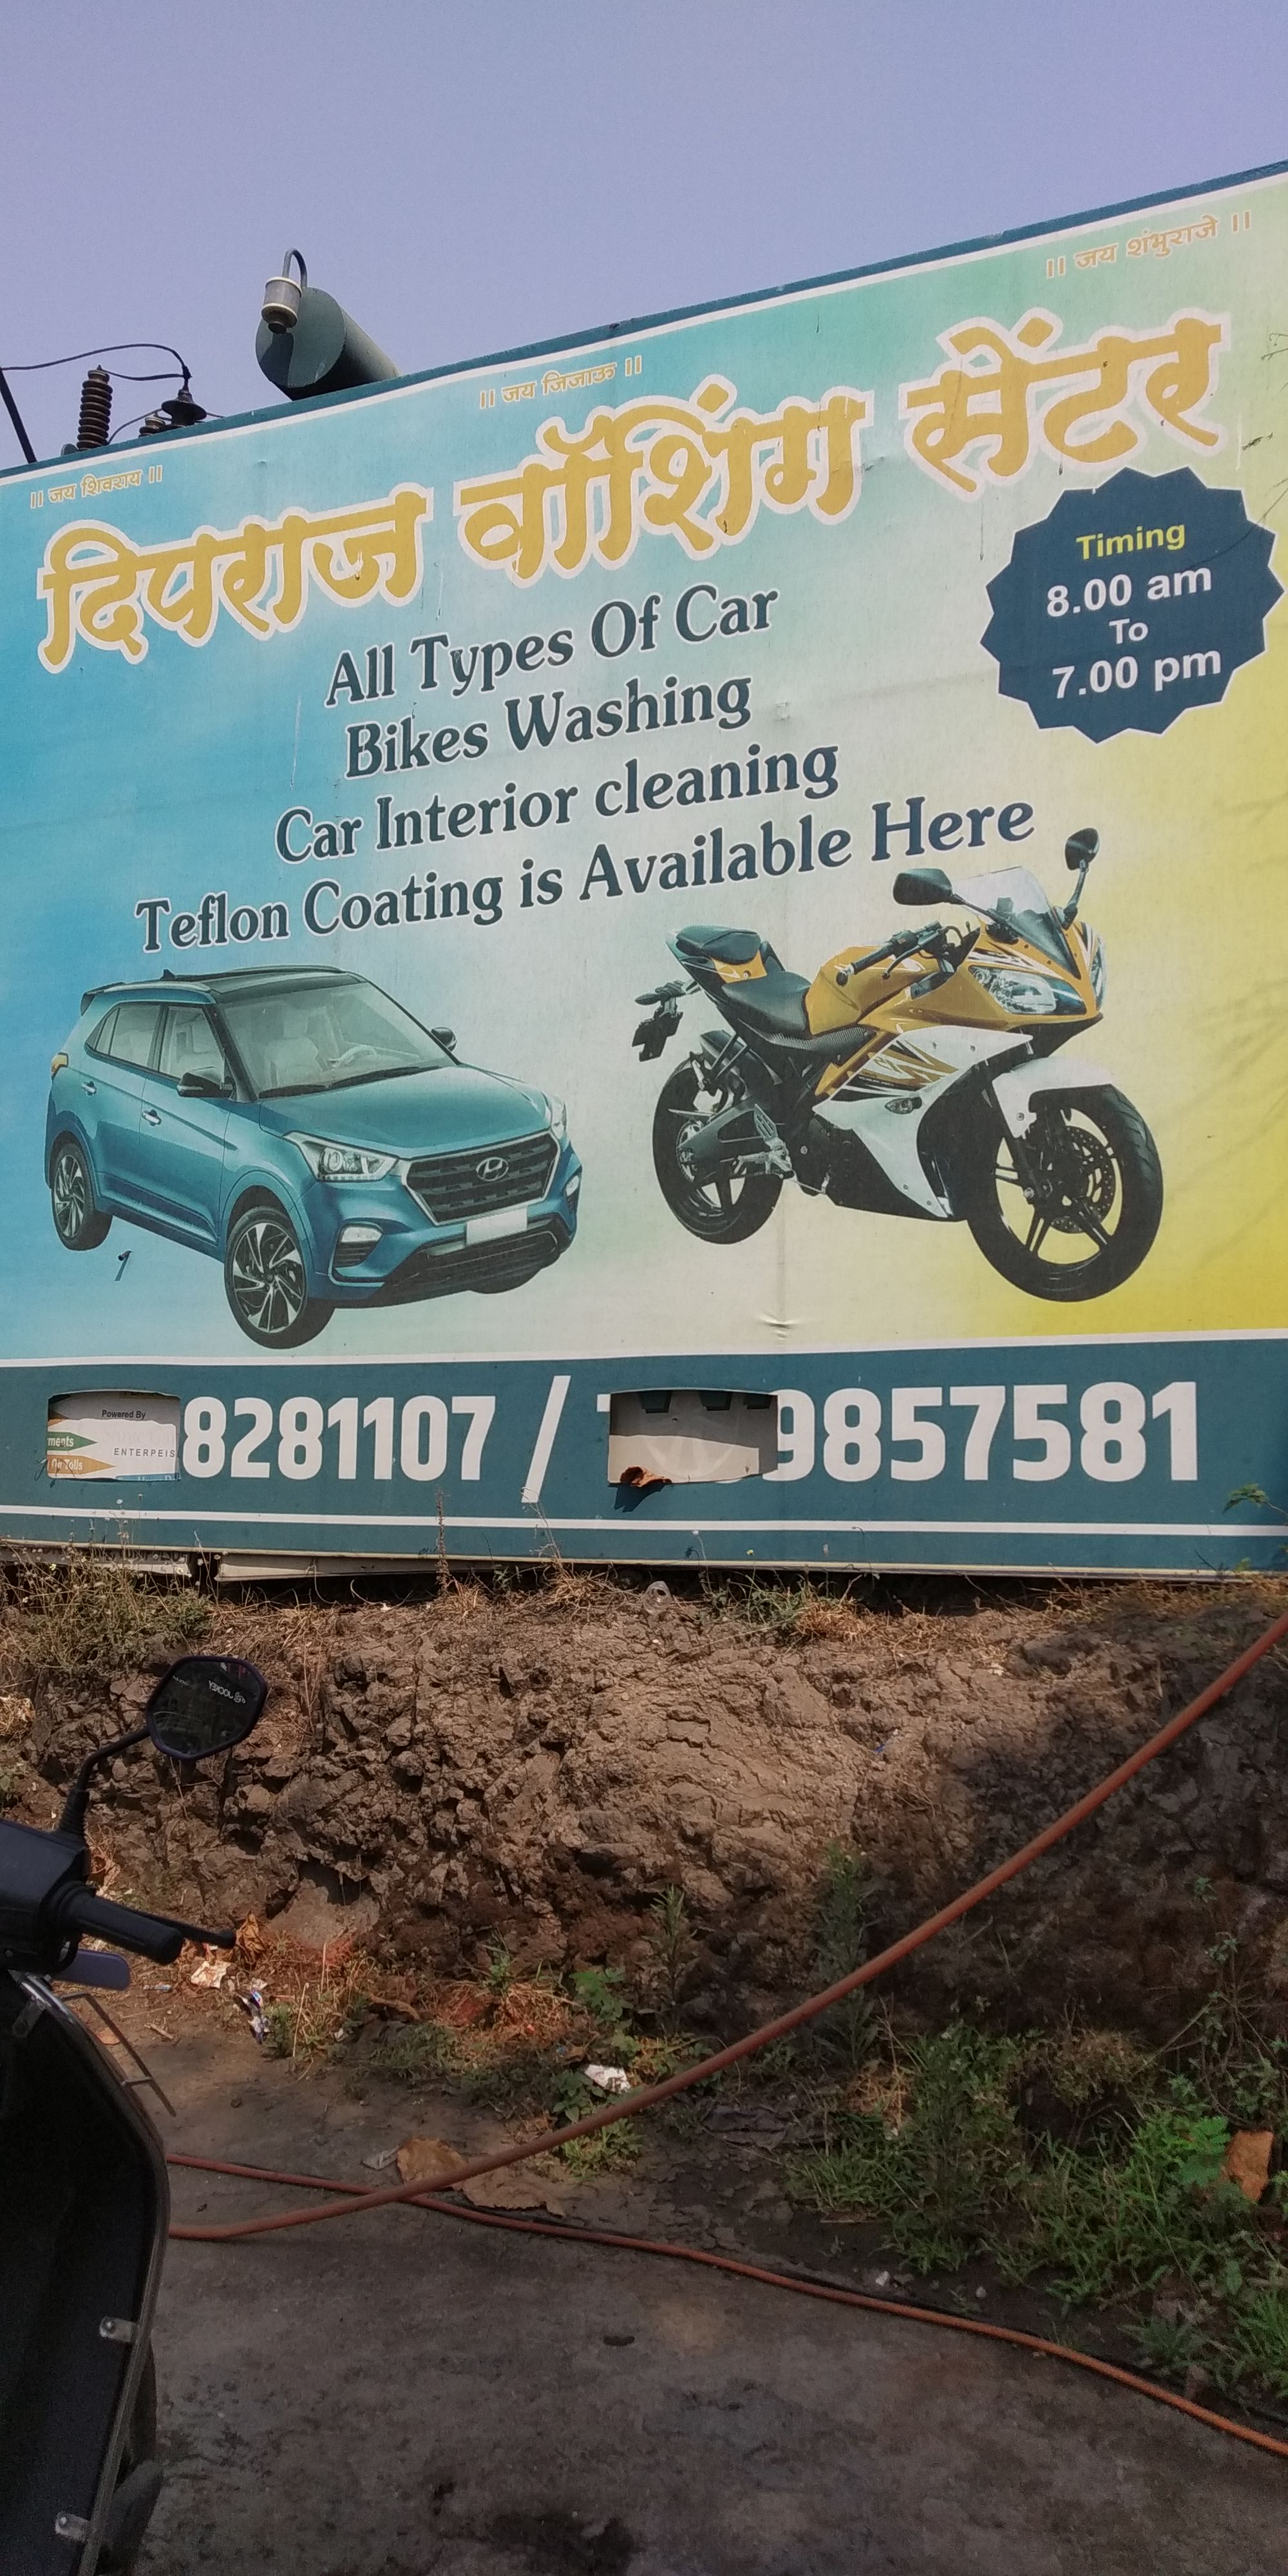 Book Car Wash With Deepraj  Washing Center in Pune at Affordable Price.